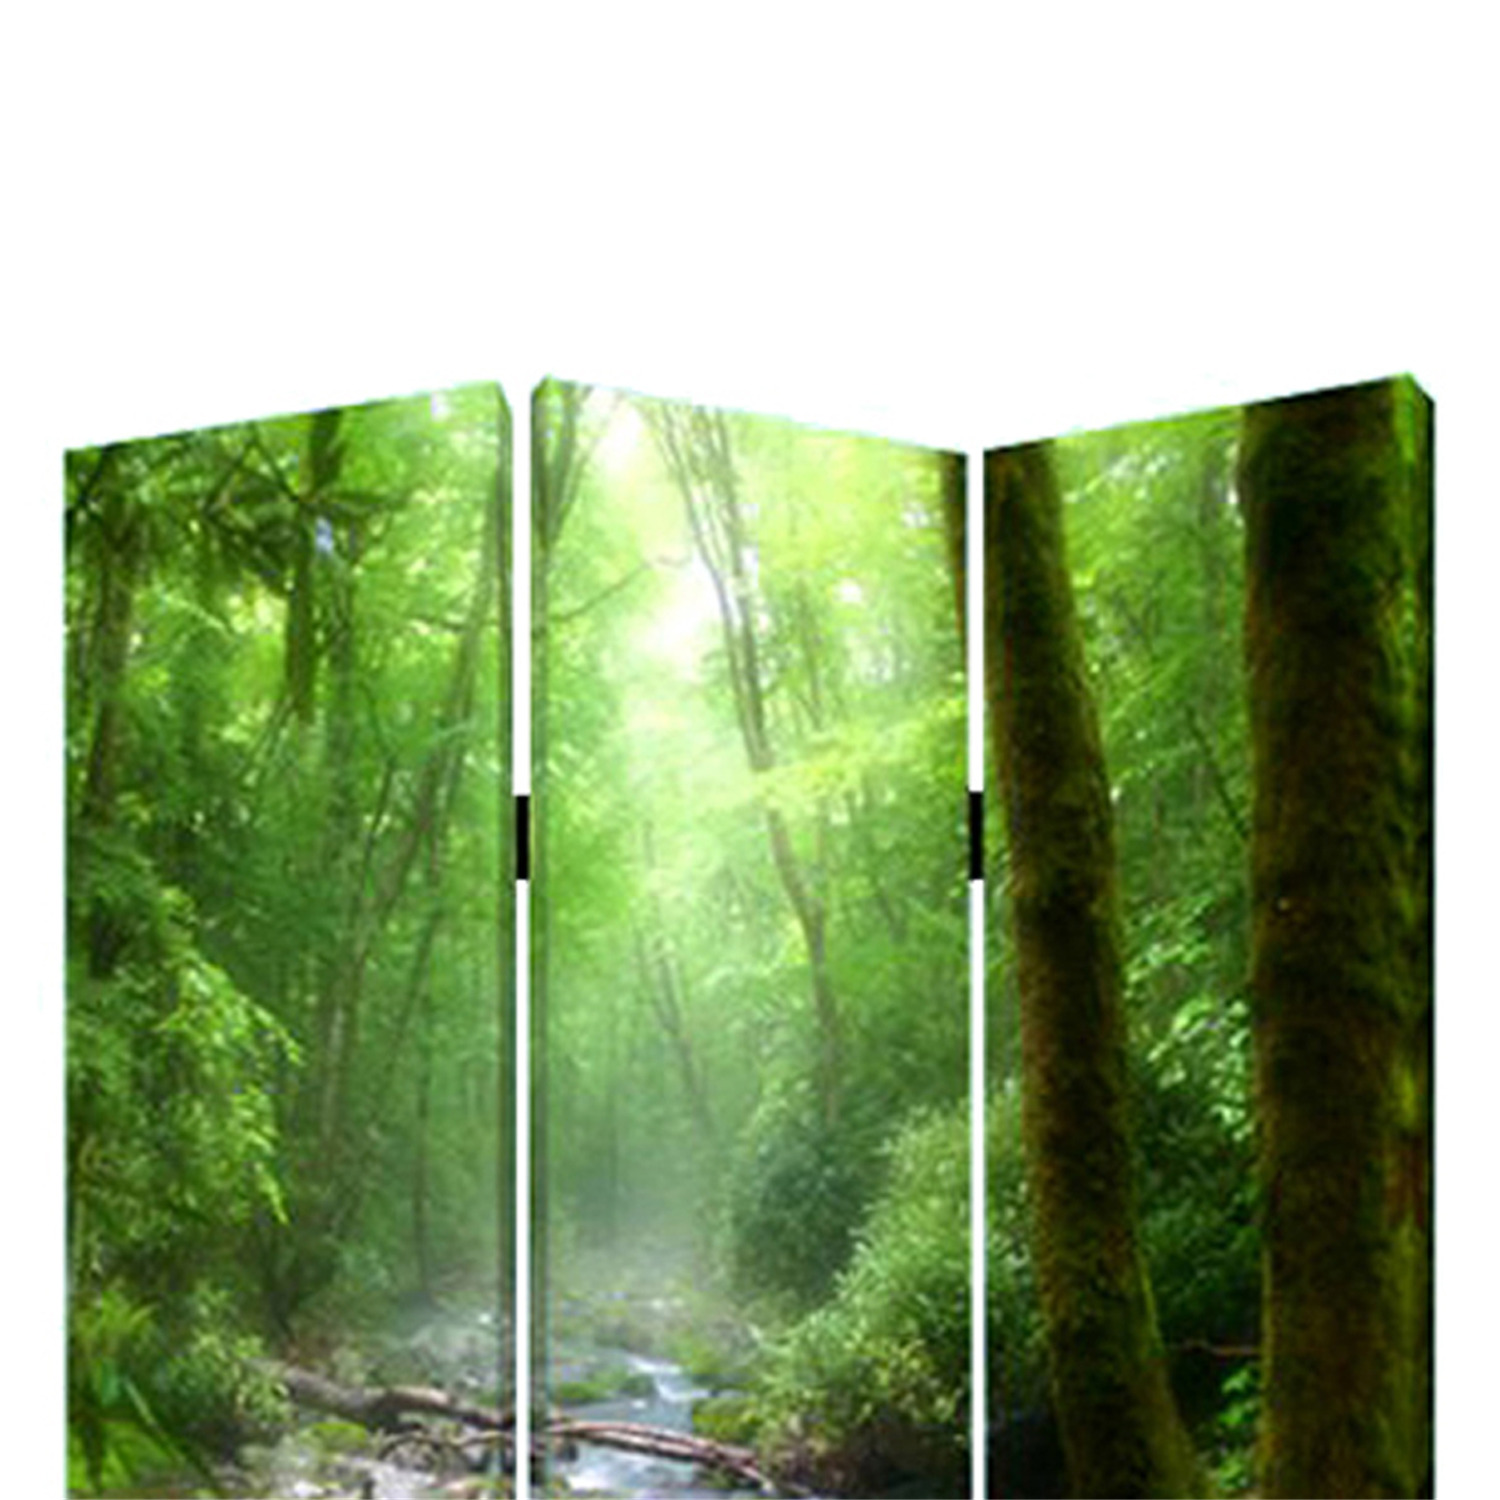 3 Panel Foldable Canvas Screen with Rainforest Print in Green - image 3 of 3